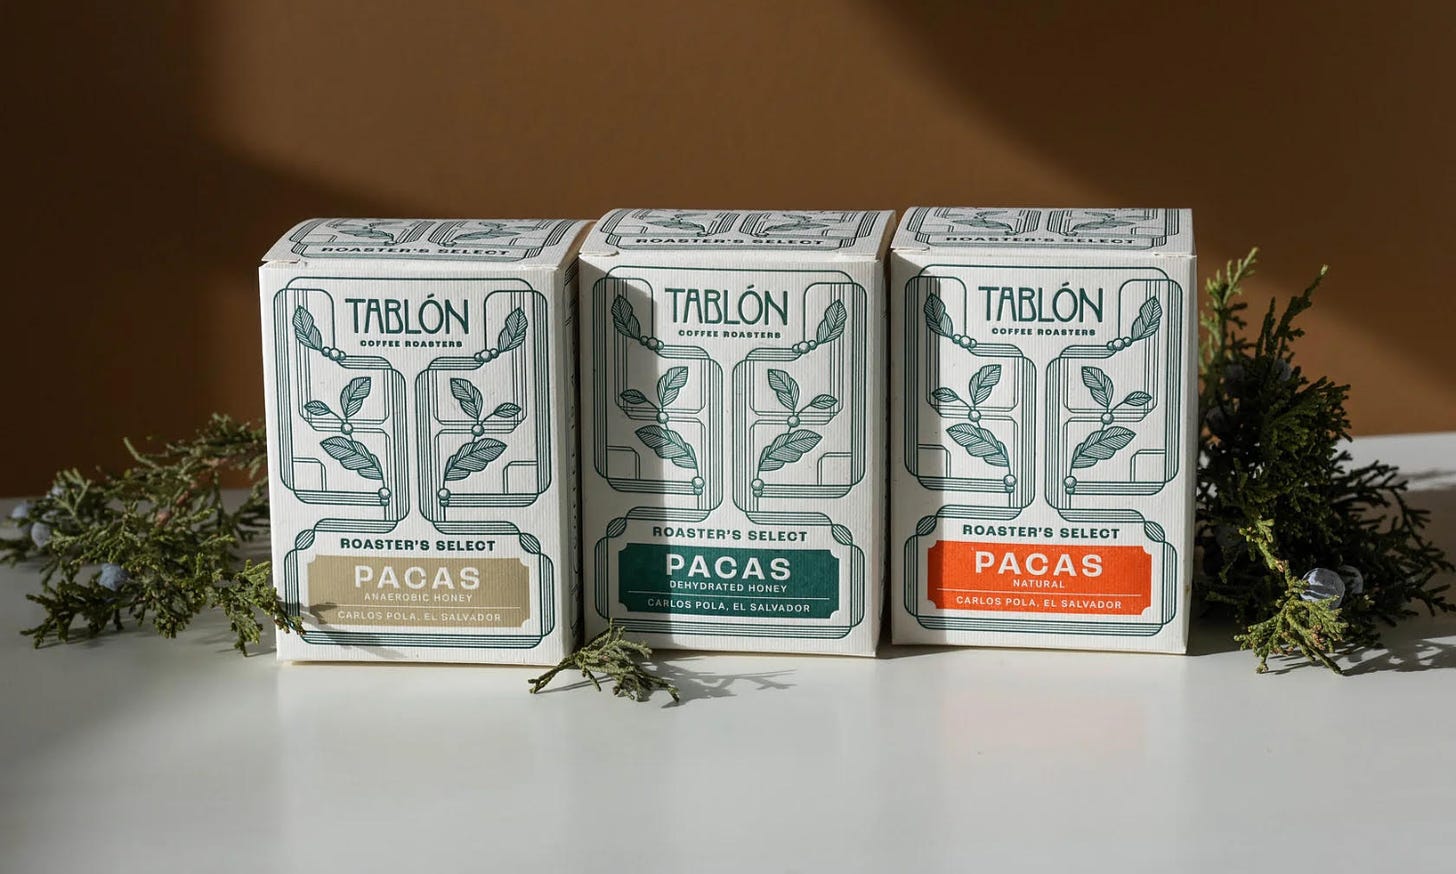 A close-up of three coffee boxes to display identical packaging with the exception being the color block behind the description. The white boxes have an intricate forest green line design framing the brand name Tablón at the top.